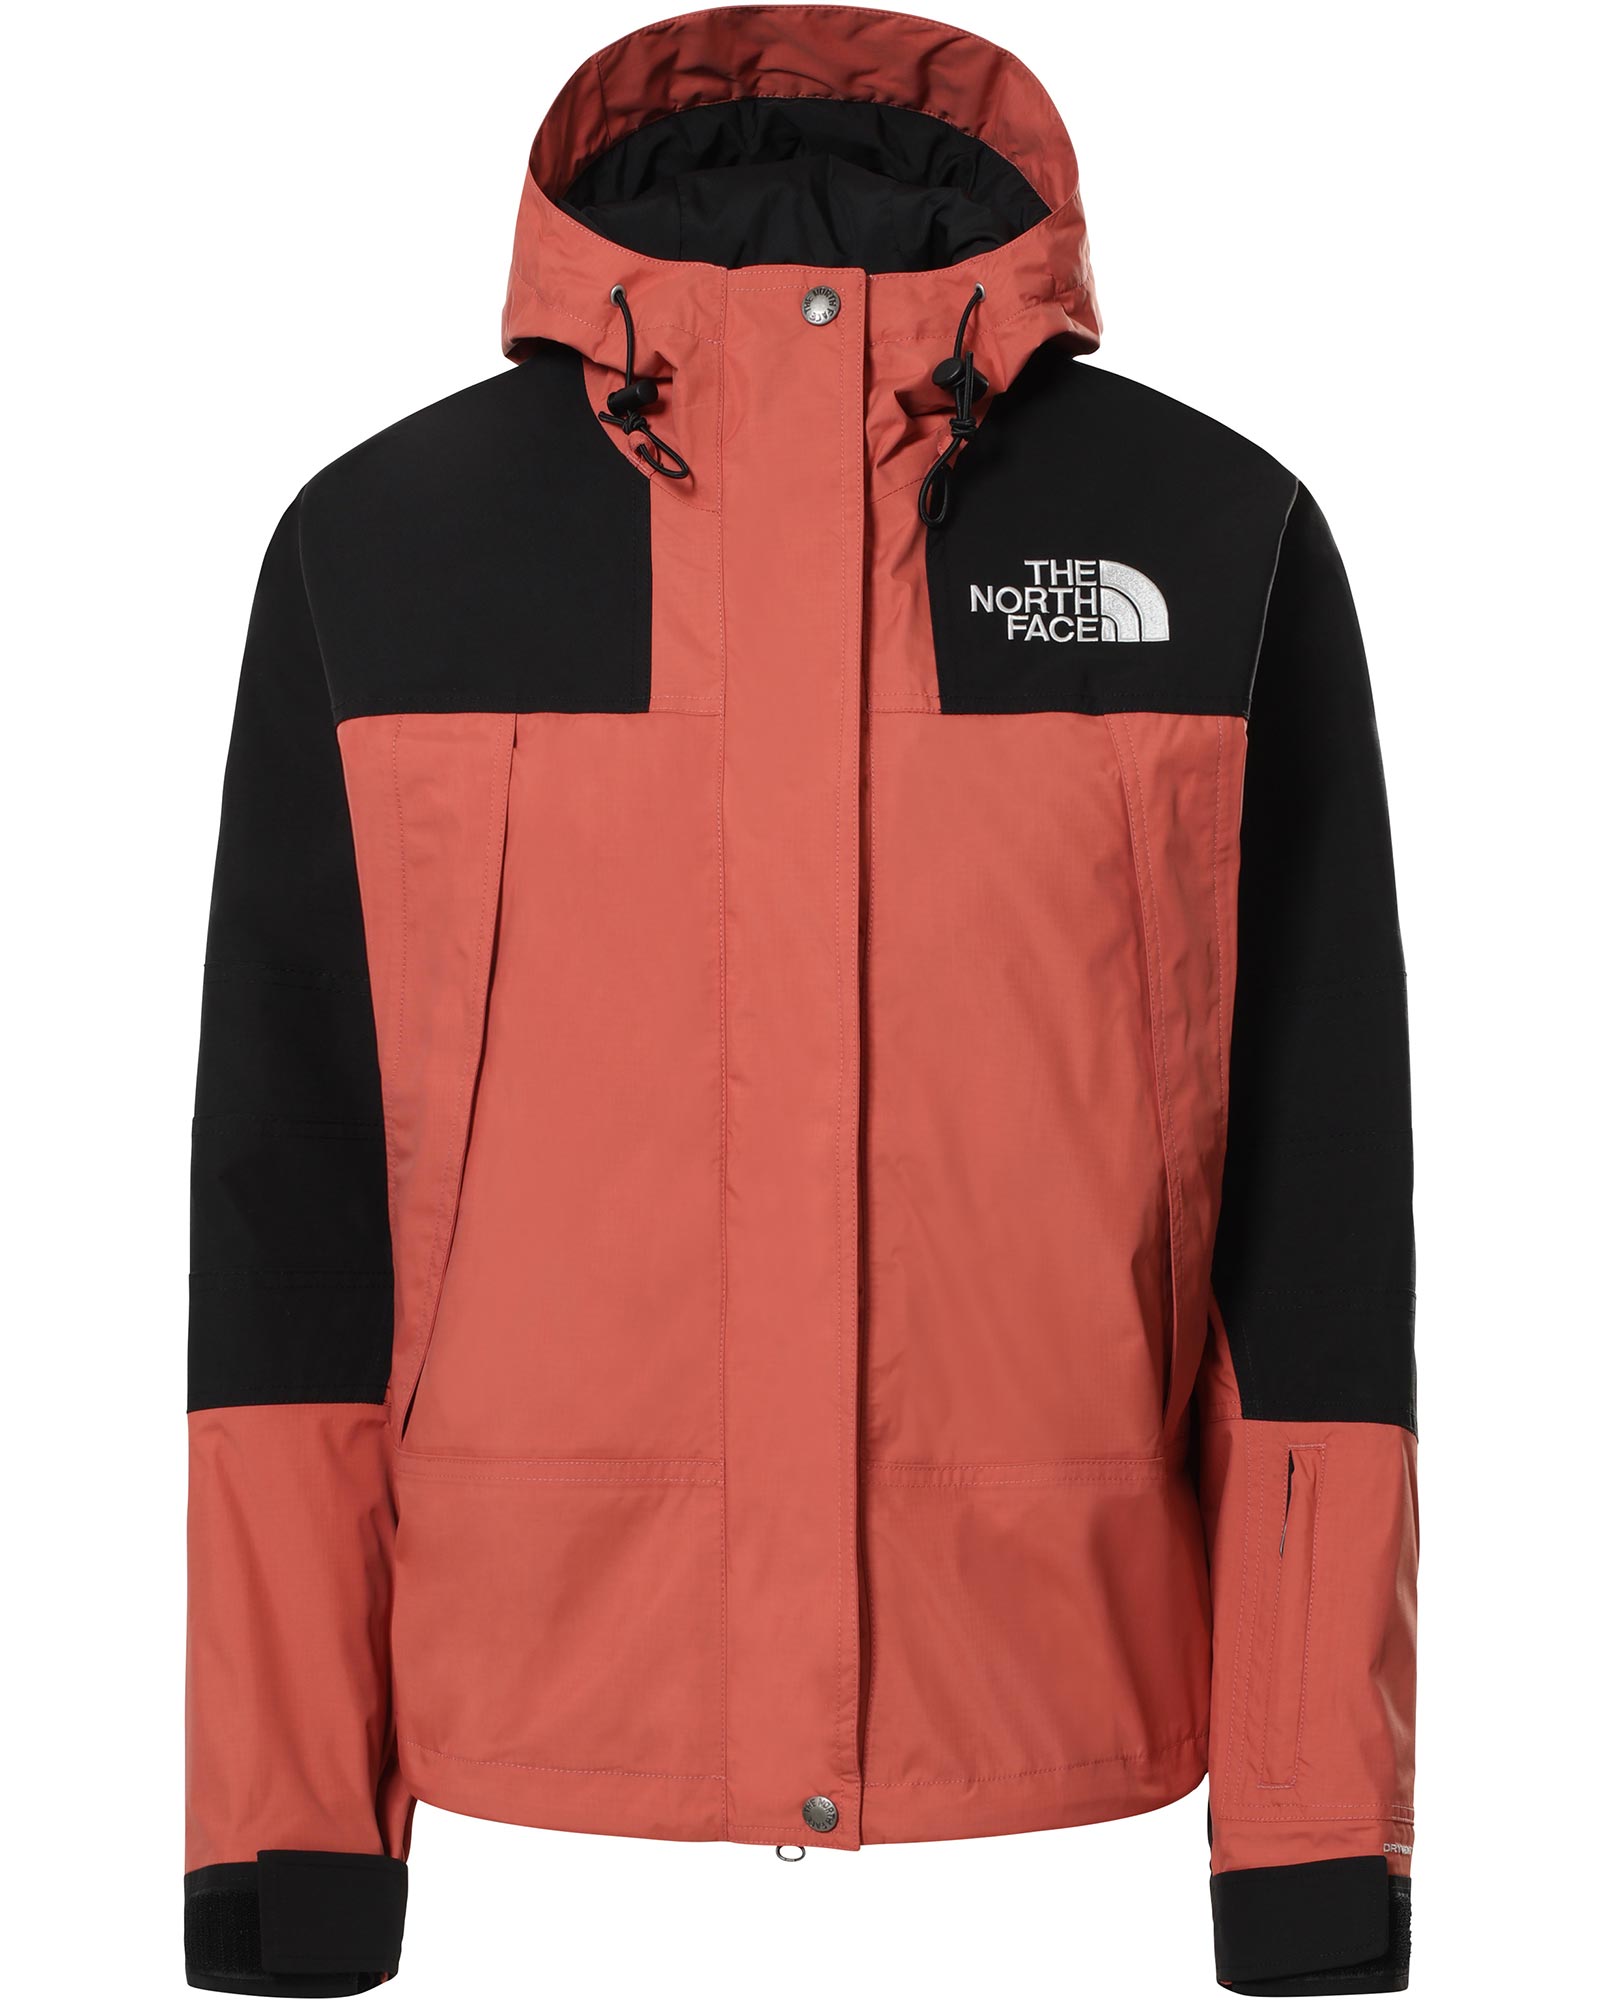 The North Face K2RM DryVent Women’s Jacket - Faded Rose XS